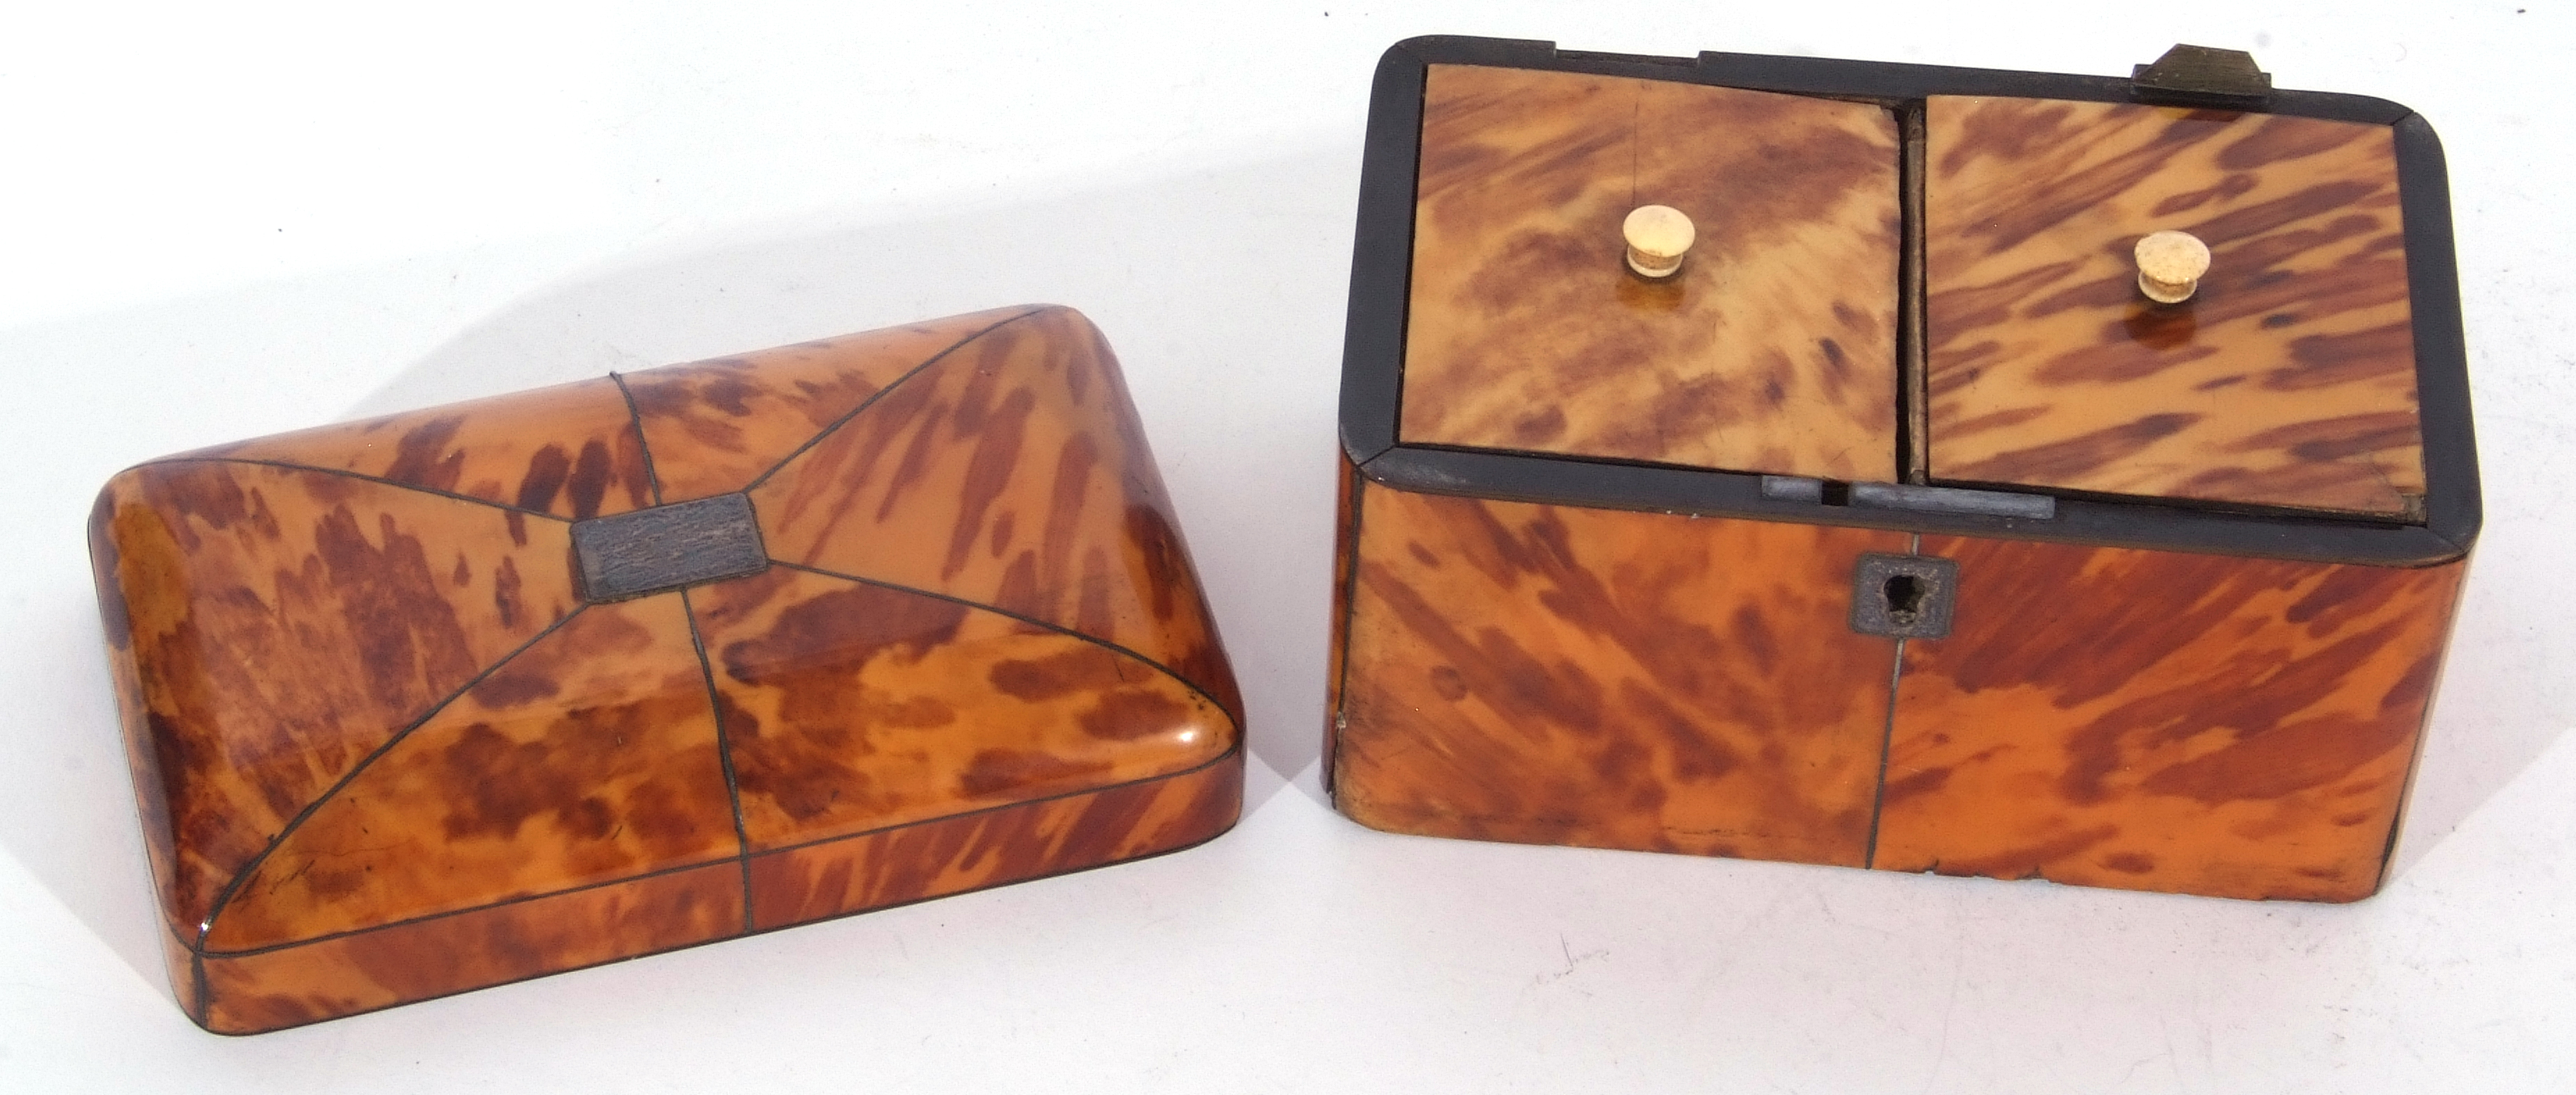 Mid-19th century tortoiseshell veneered tea caddy with pewter divisional inlays, the lid opening - Image 11 of 11